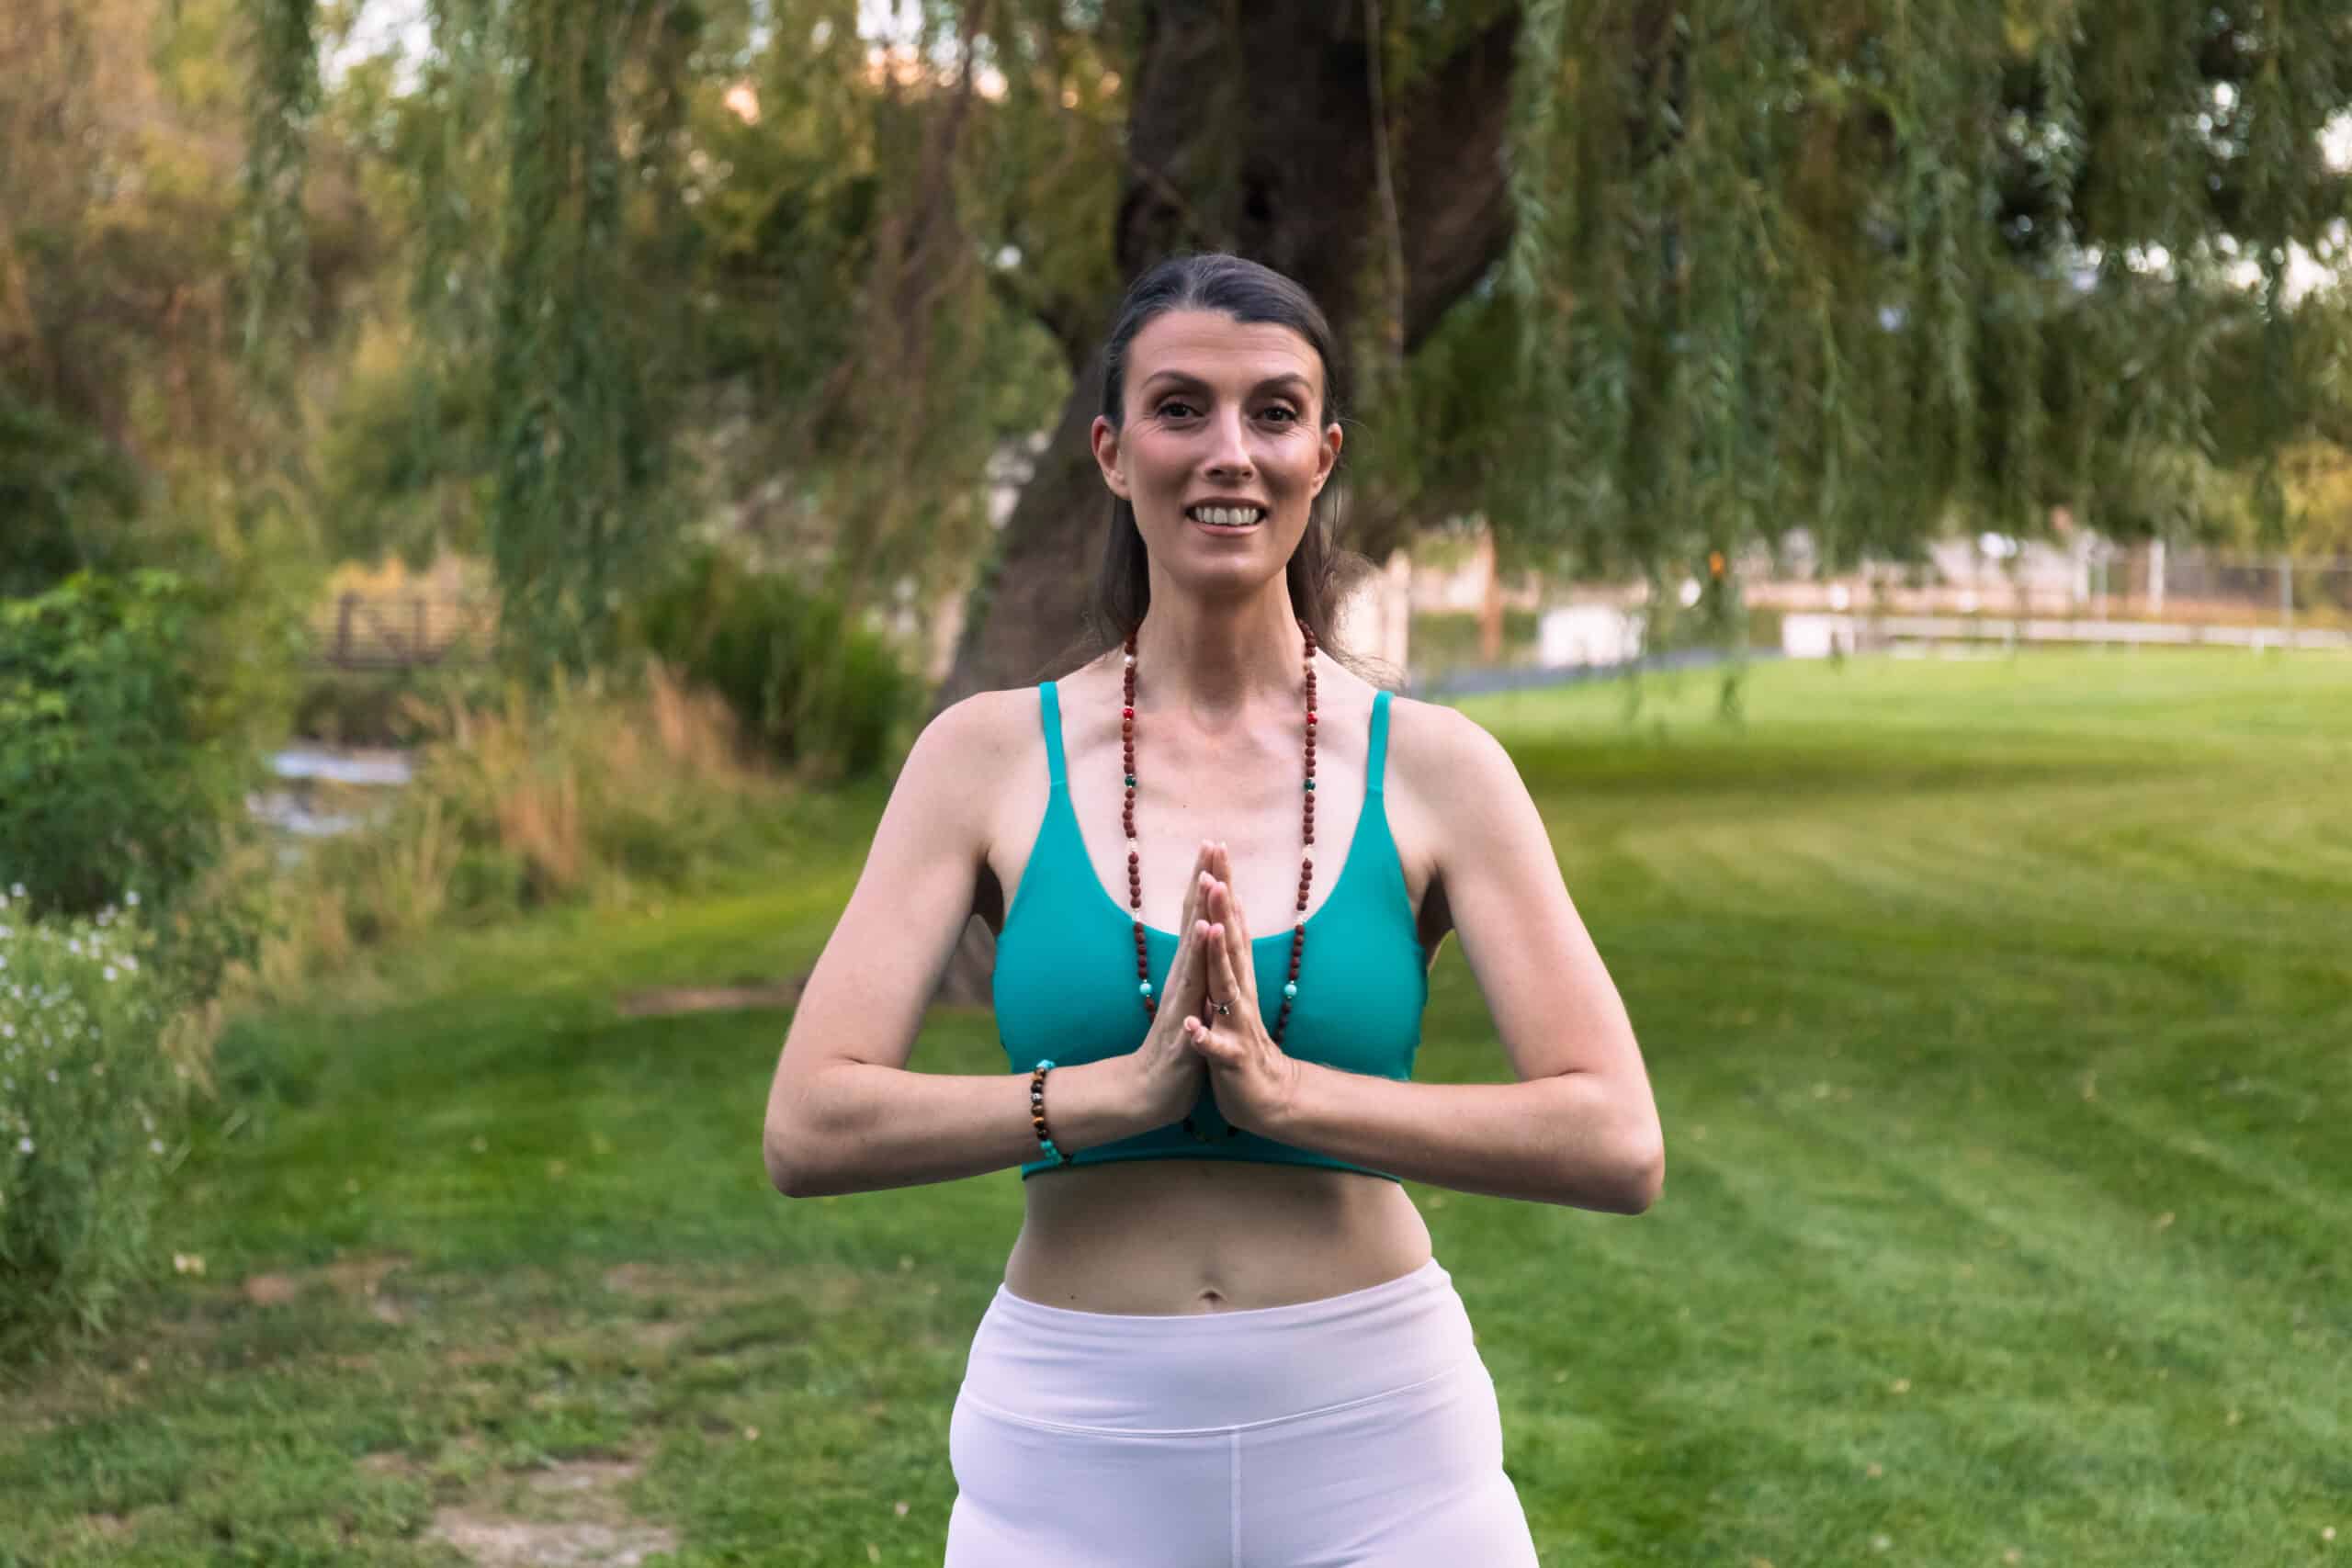 Danae Robinett practicing yoga outdoors with hands in namaste pose.